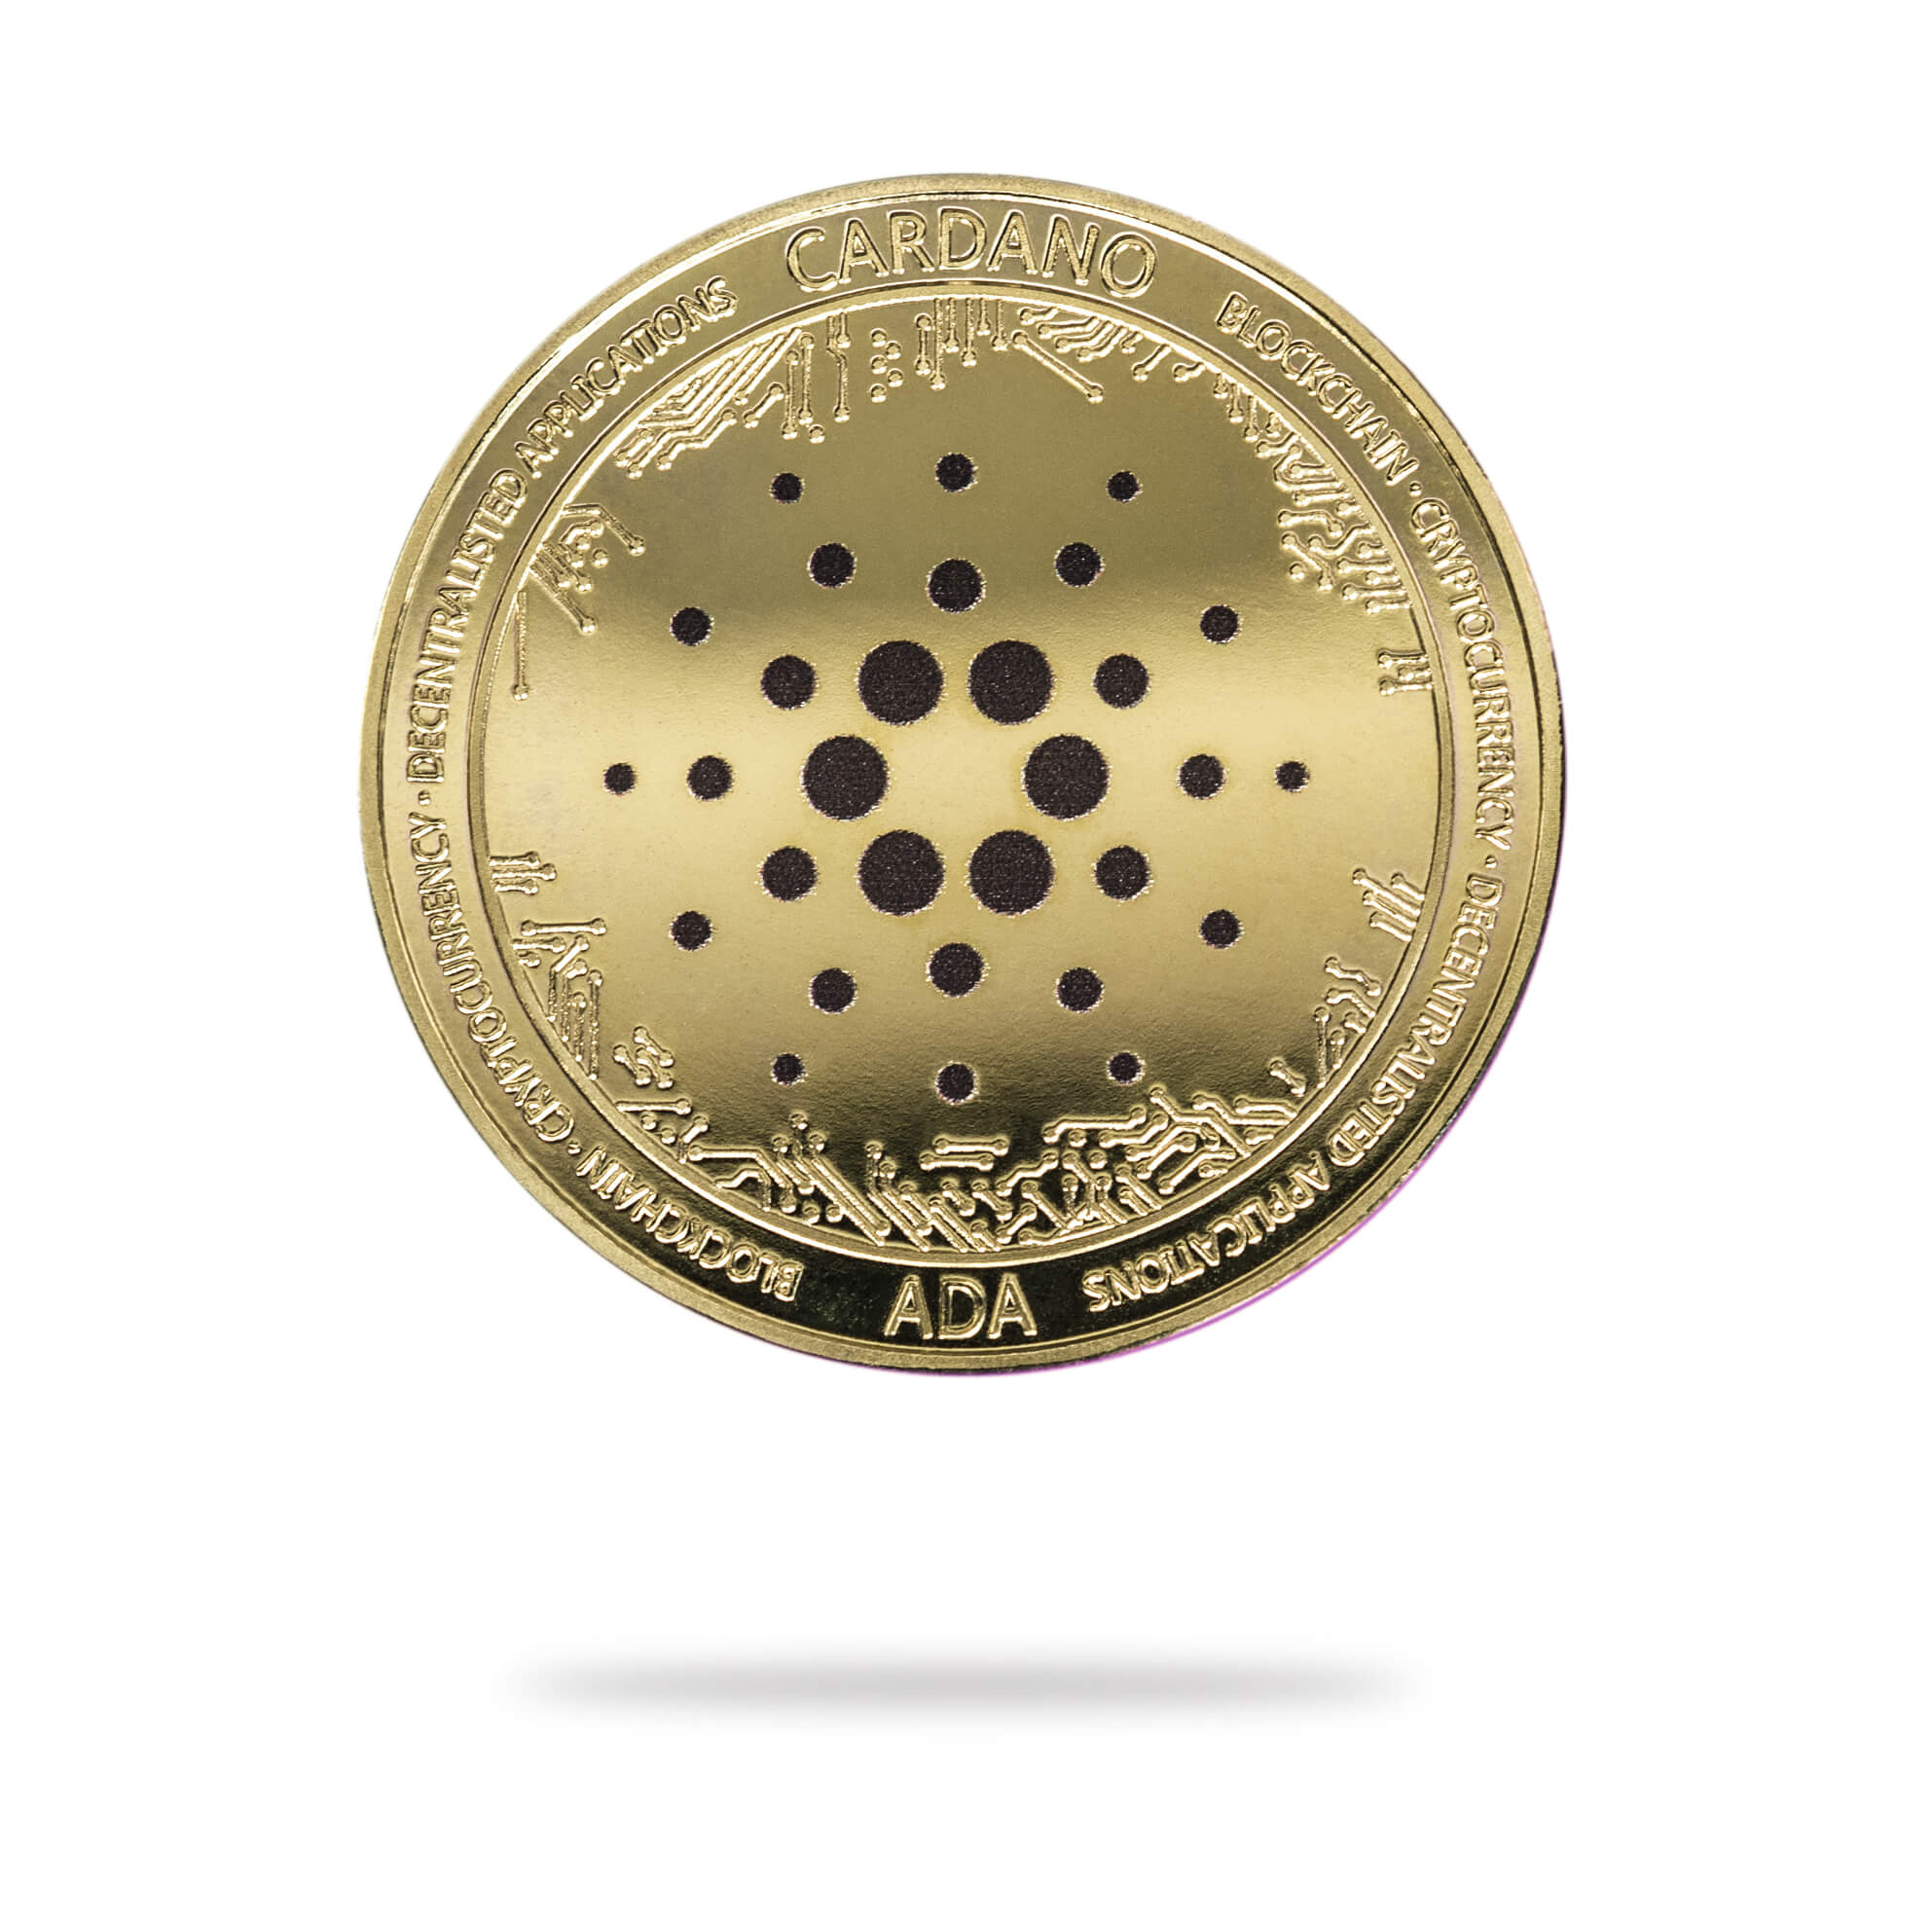 Cryptochips | Cardano (2021 Edition) Physical Crypto Coin. Collectable cryptocurrency merch you can hodl